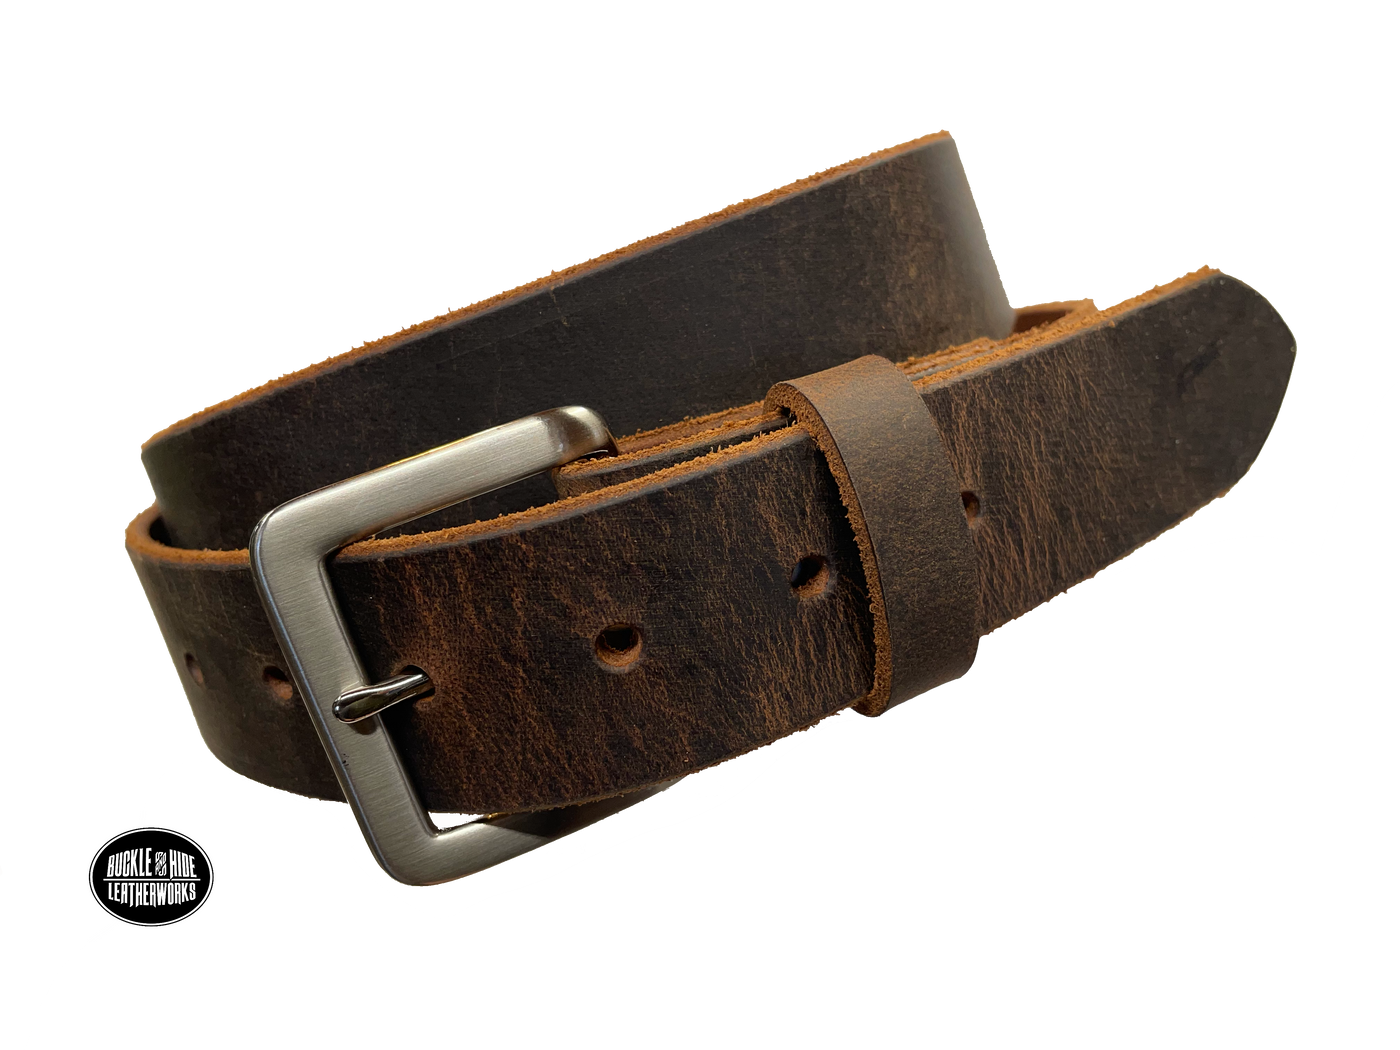 This brown leather belt is made from Crazy Horse tanned leather for that distressed and pull-up look. The edges are beveled and left raw for a contrasting look. It has an antique nickel coated solid brass buckle that is snapped in place. Belt is 1 1/2" wide and available in lengths from 34" to 44".  It is handmade in our shop in Smyrna, TN, just outside of Nashville. Choose Plain or Embossed Stitch pattern.